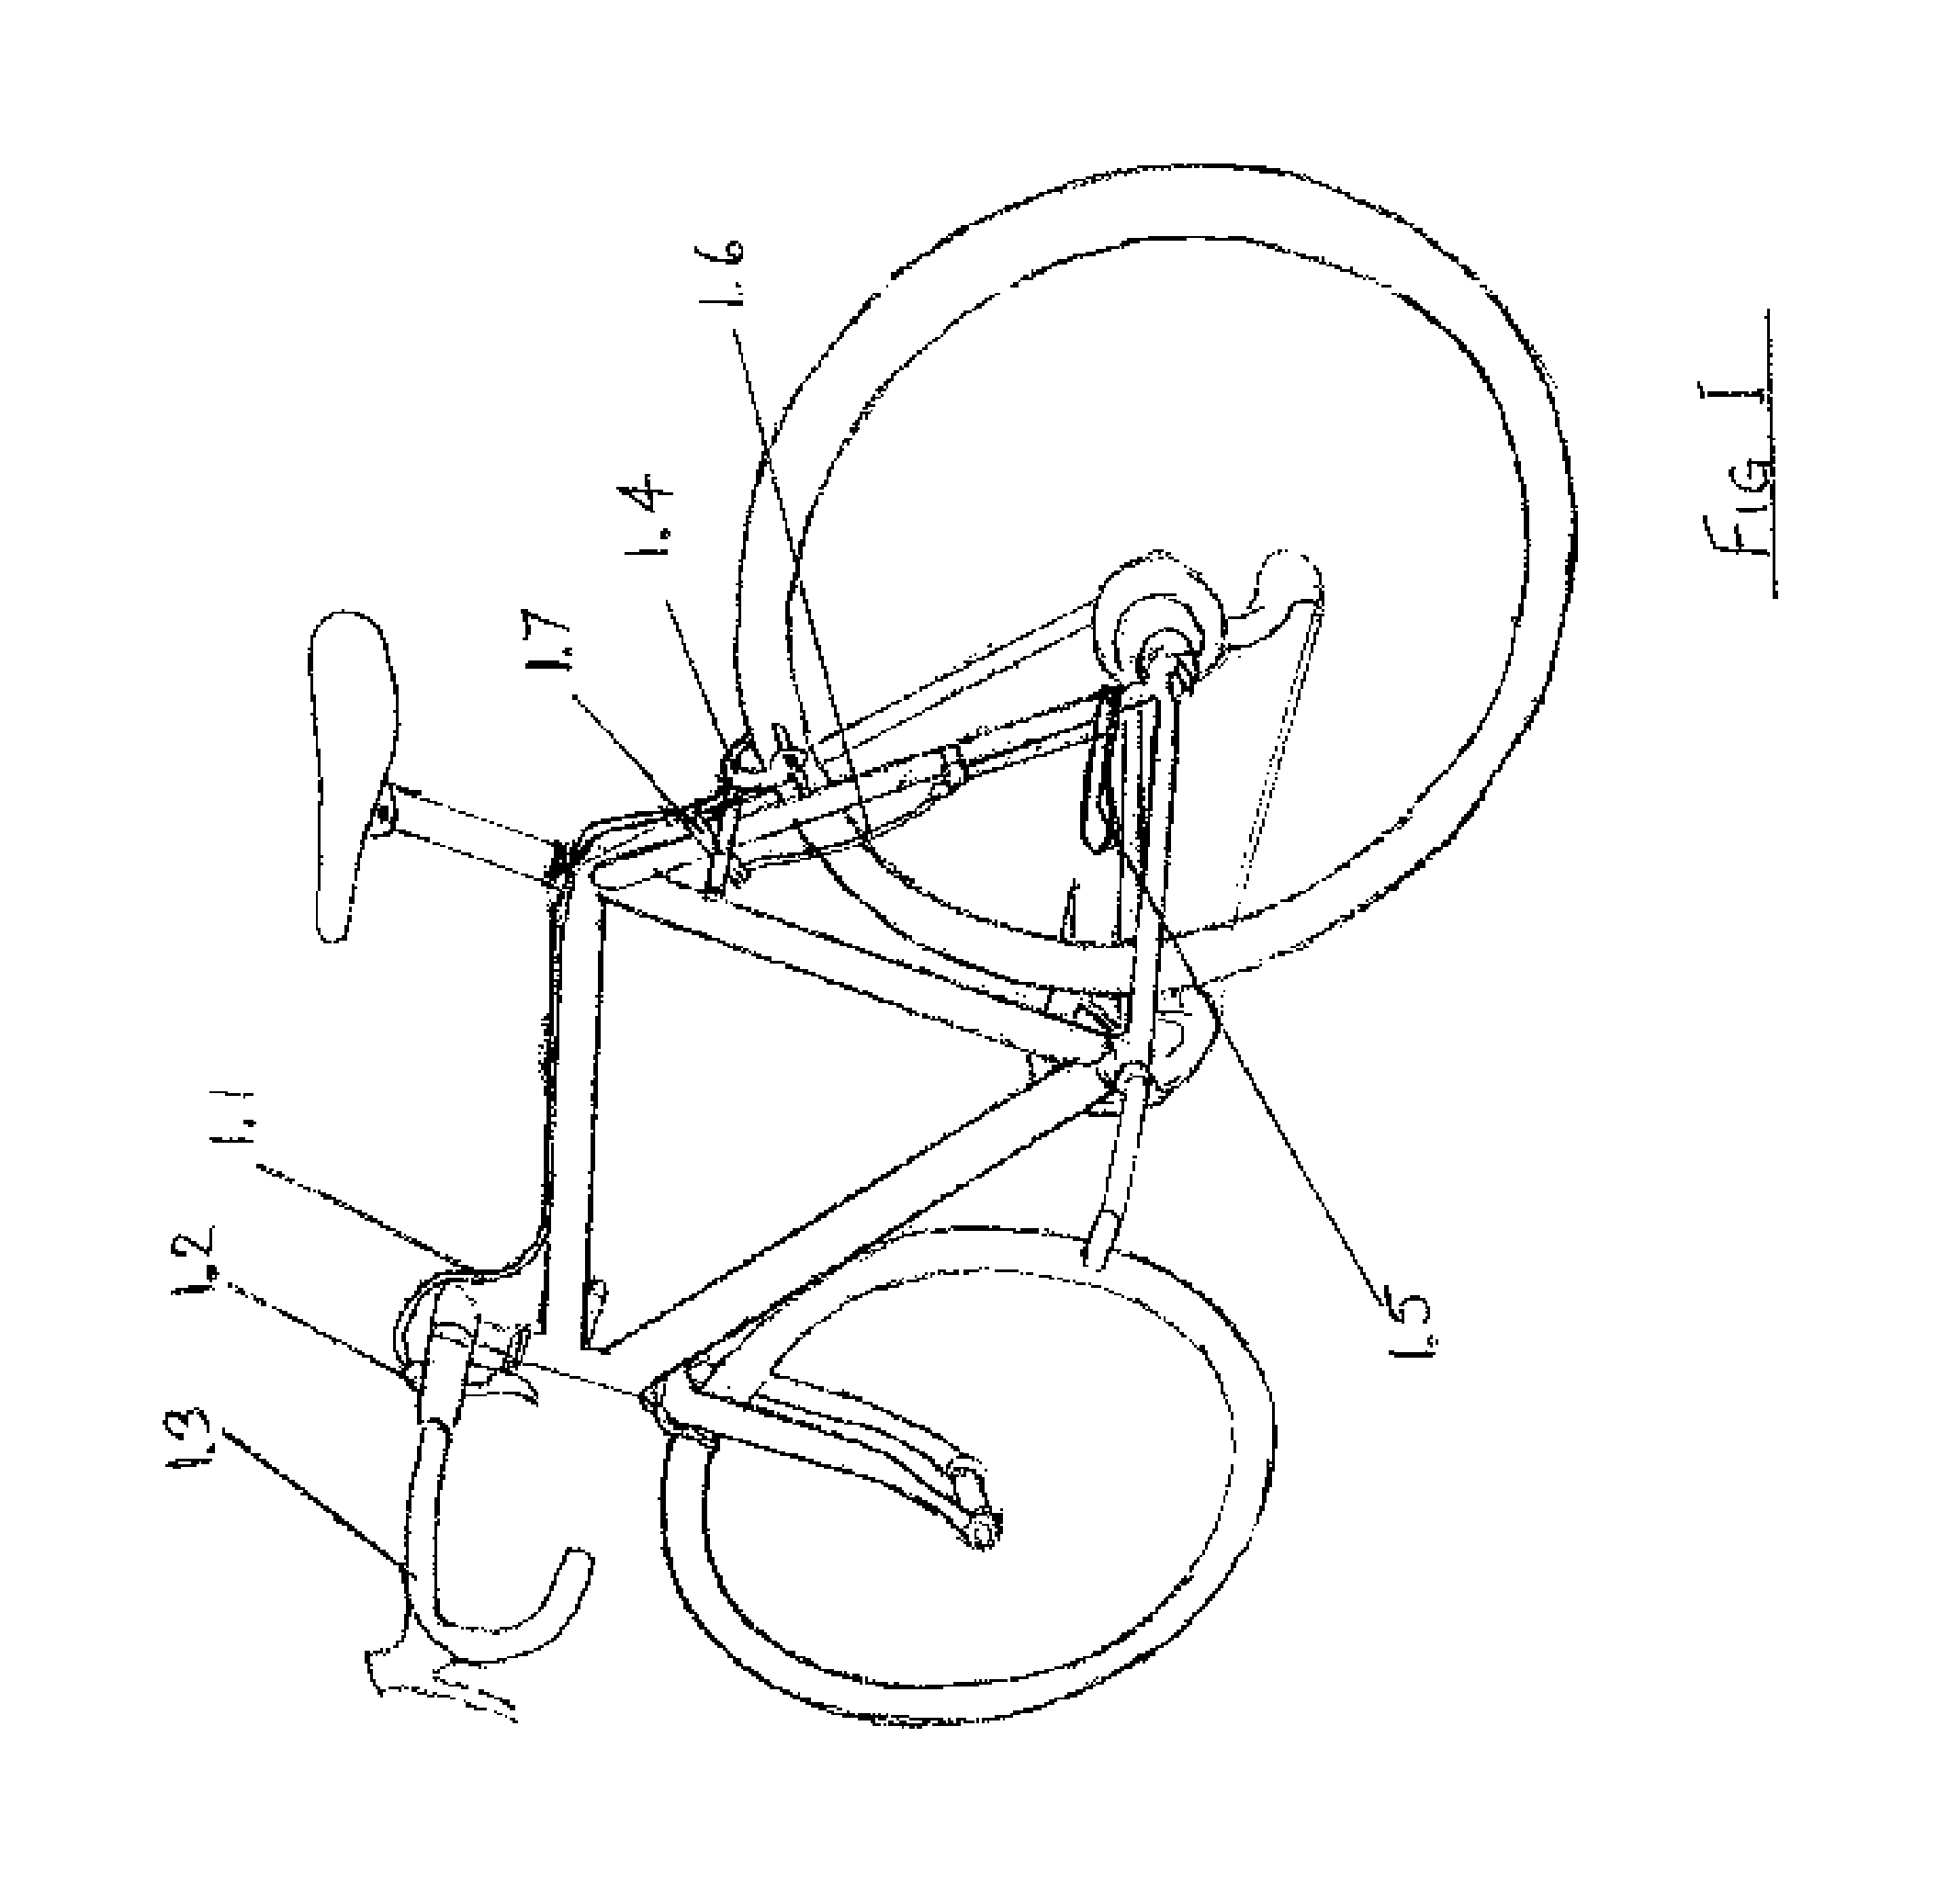 Supplemental mechanism for actuating the brake of a bicycle and methods of use